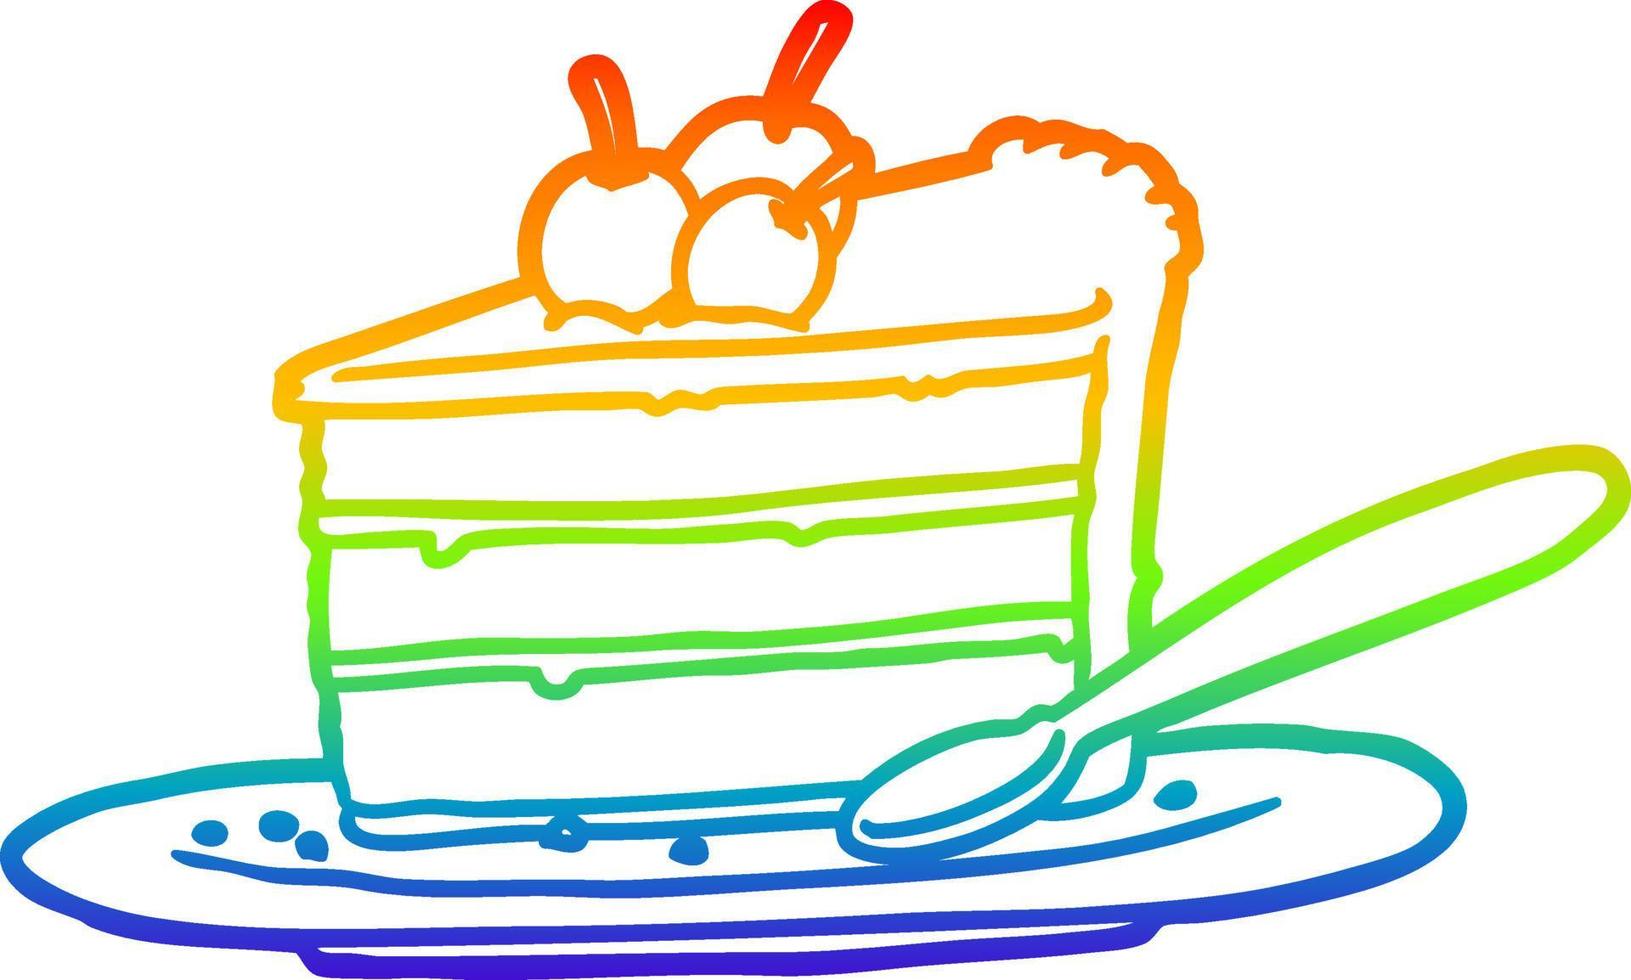 rainbow gradient line drawing expensive slice of chocolate cake vector